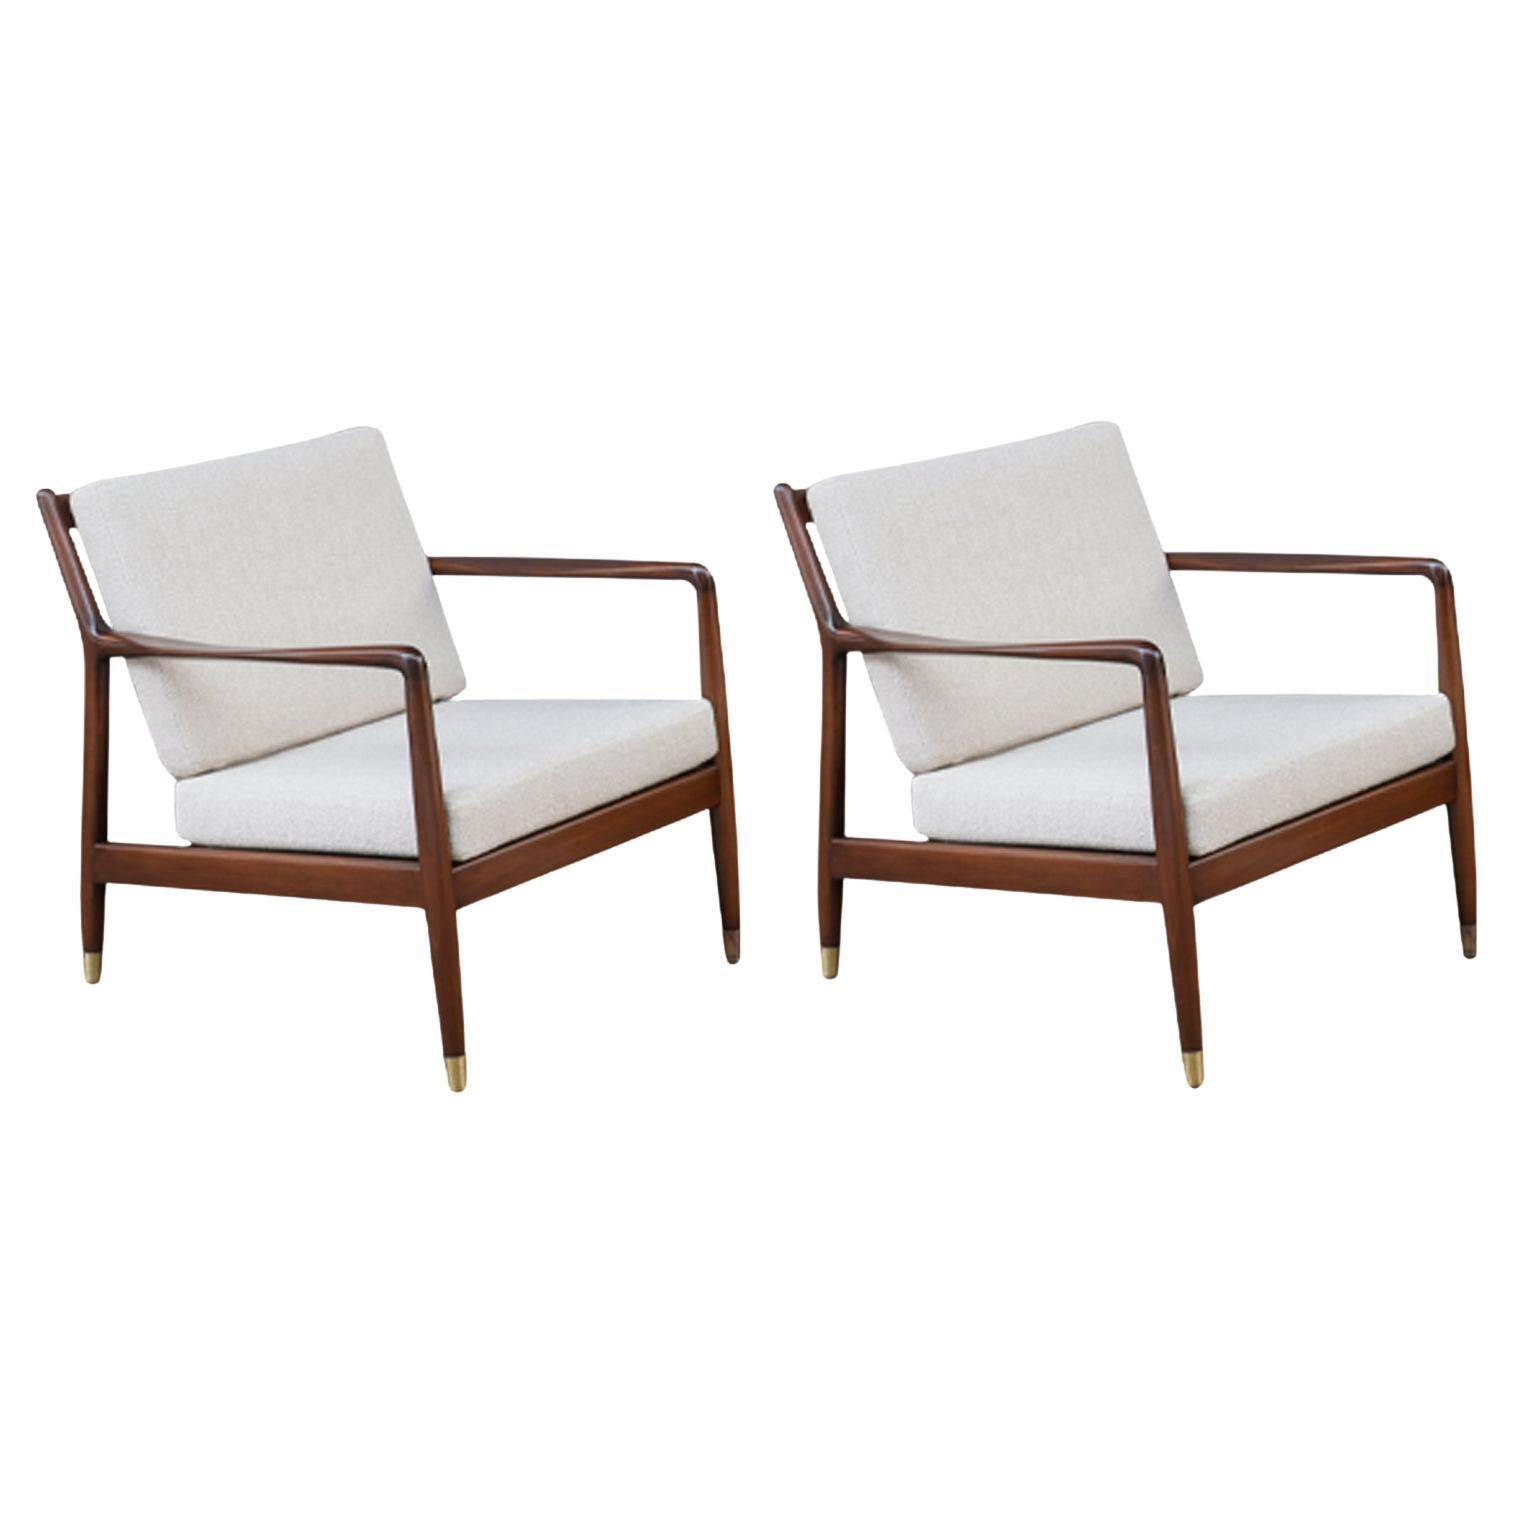 Expertly Restored - Scandinavian Modern Lounge Chairs by Folke Ohlsson for Dux 